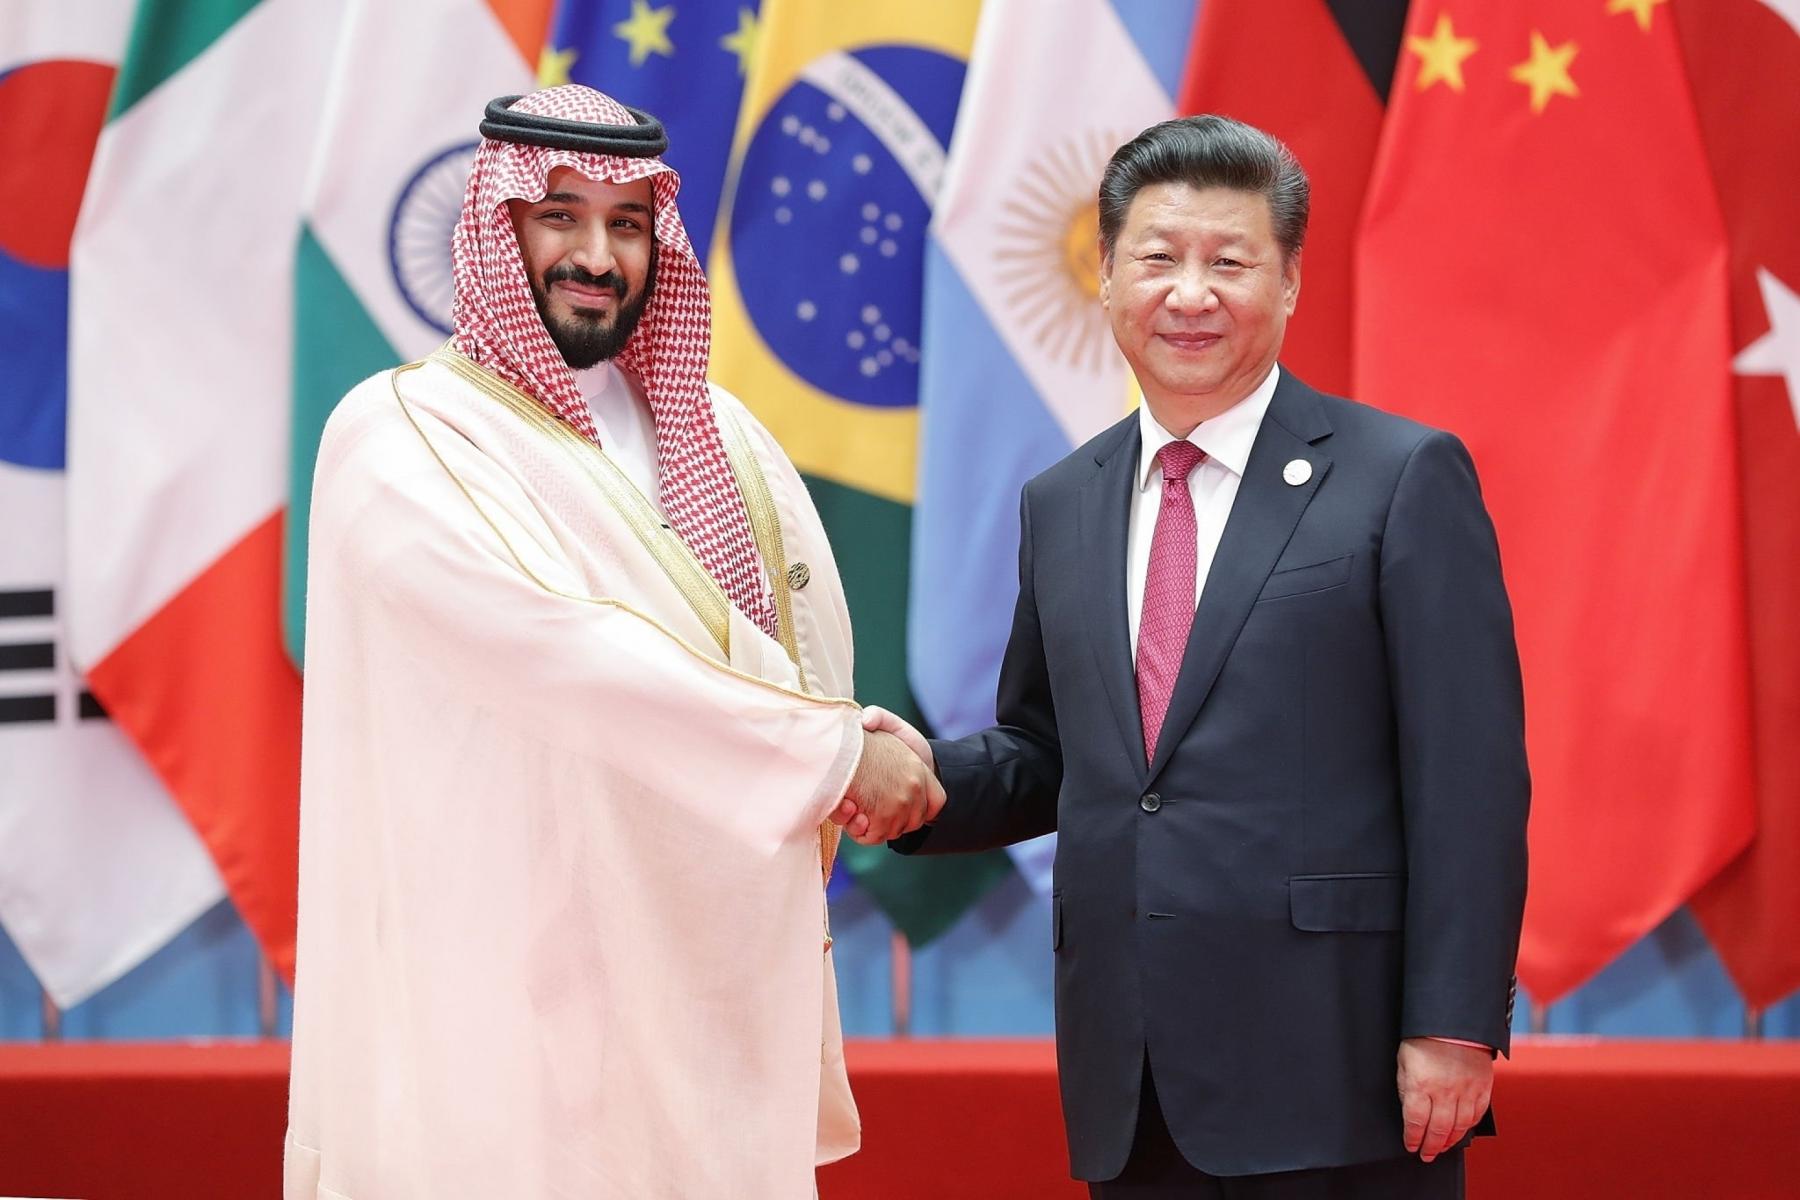 Chinese President Xi Jinping (right) shakes hands with Saudi Deputy Crown Prince and Minister of Defense Mohammed bin Salman bin Abdulaziz Al Saud to the G20 Summit on Sep 4, 2016 in Hangzhou, China.